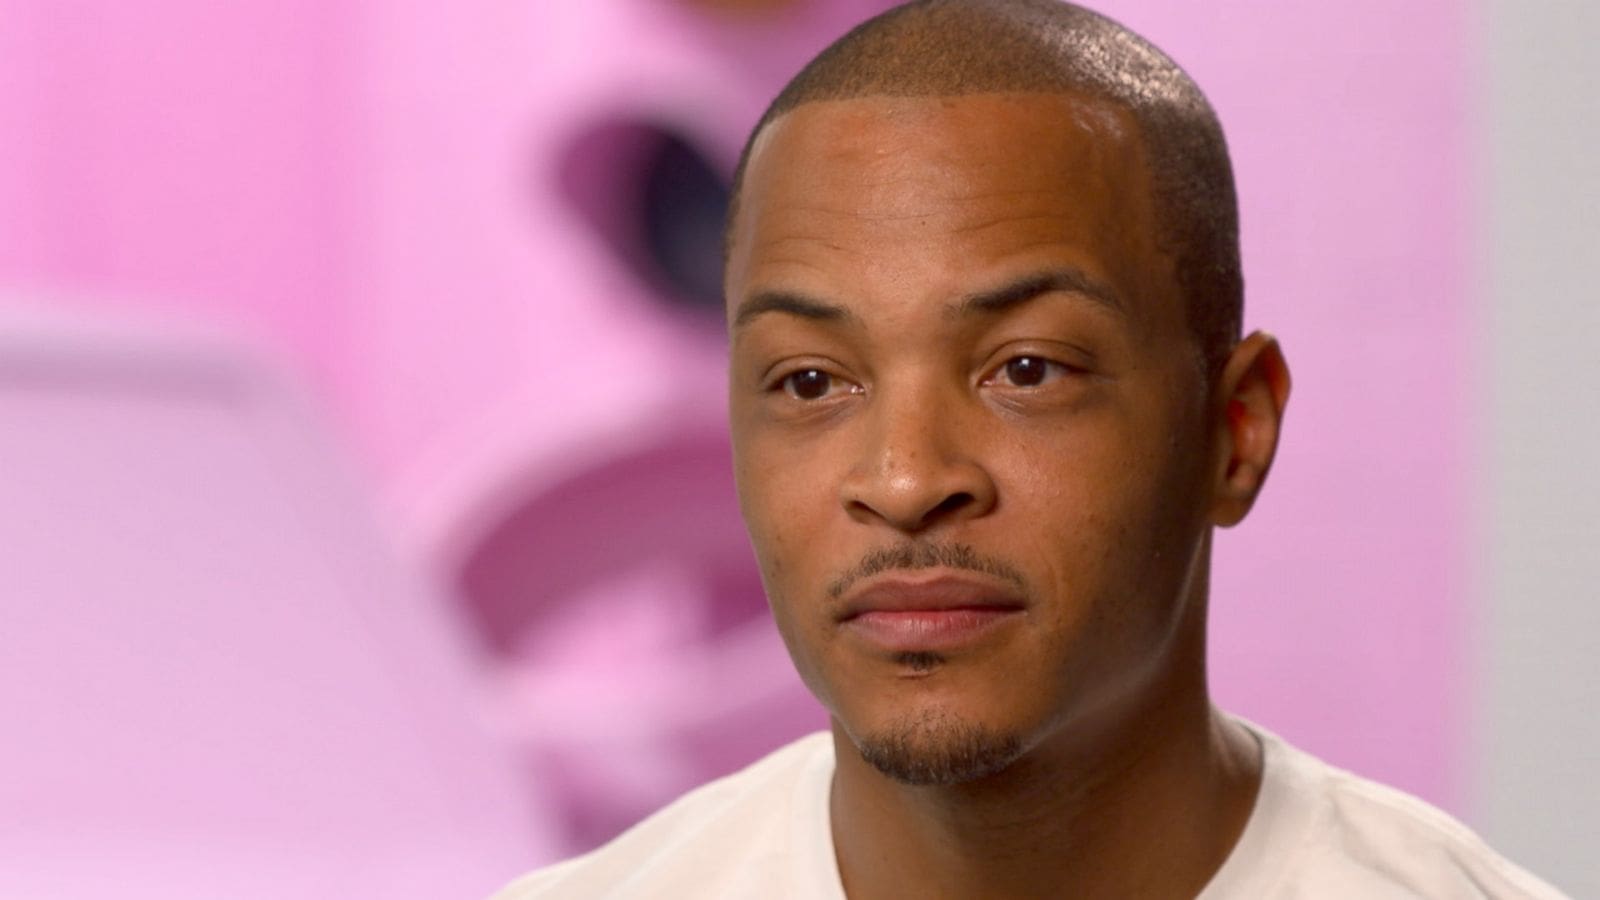 T.I. Has A Charity-Related Message For His Fans - See The Video